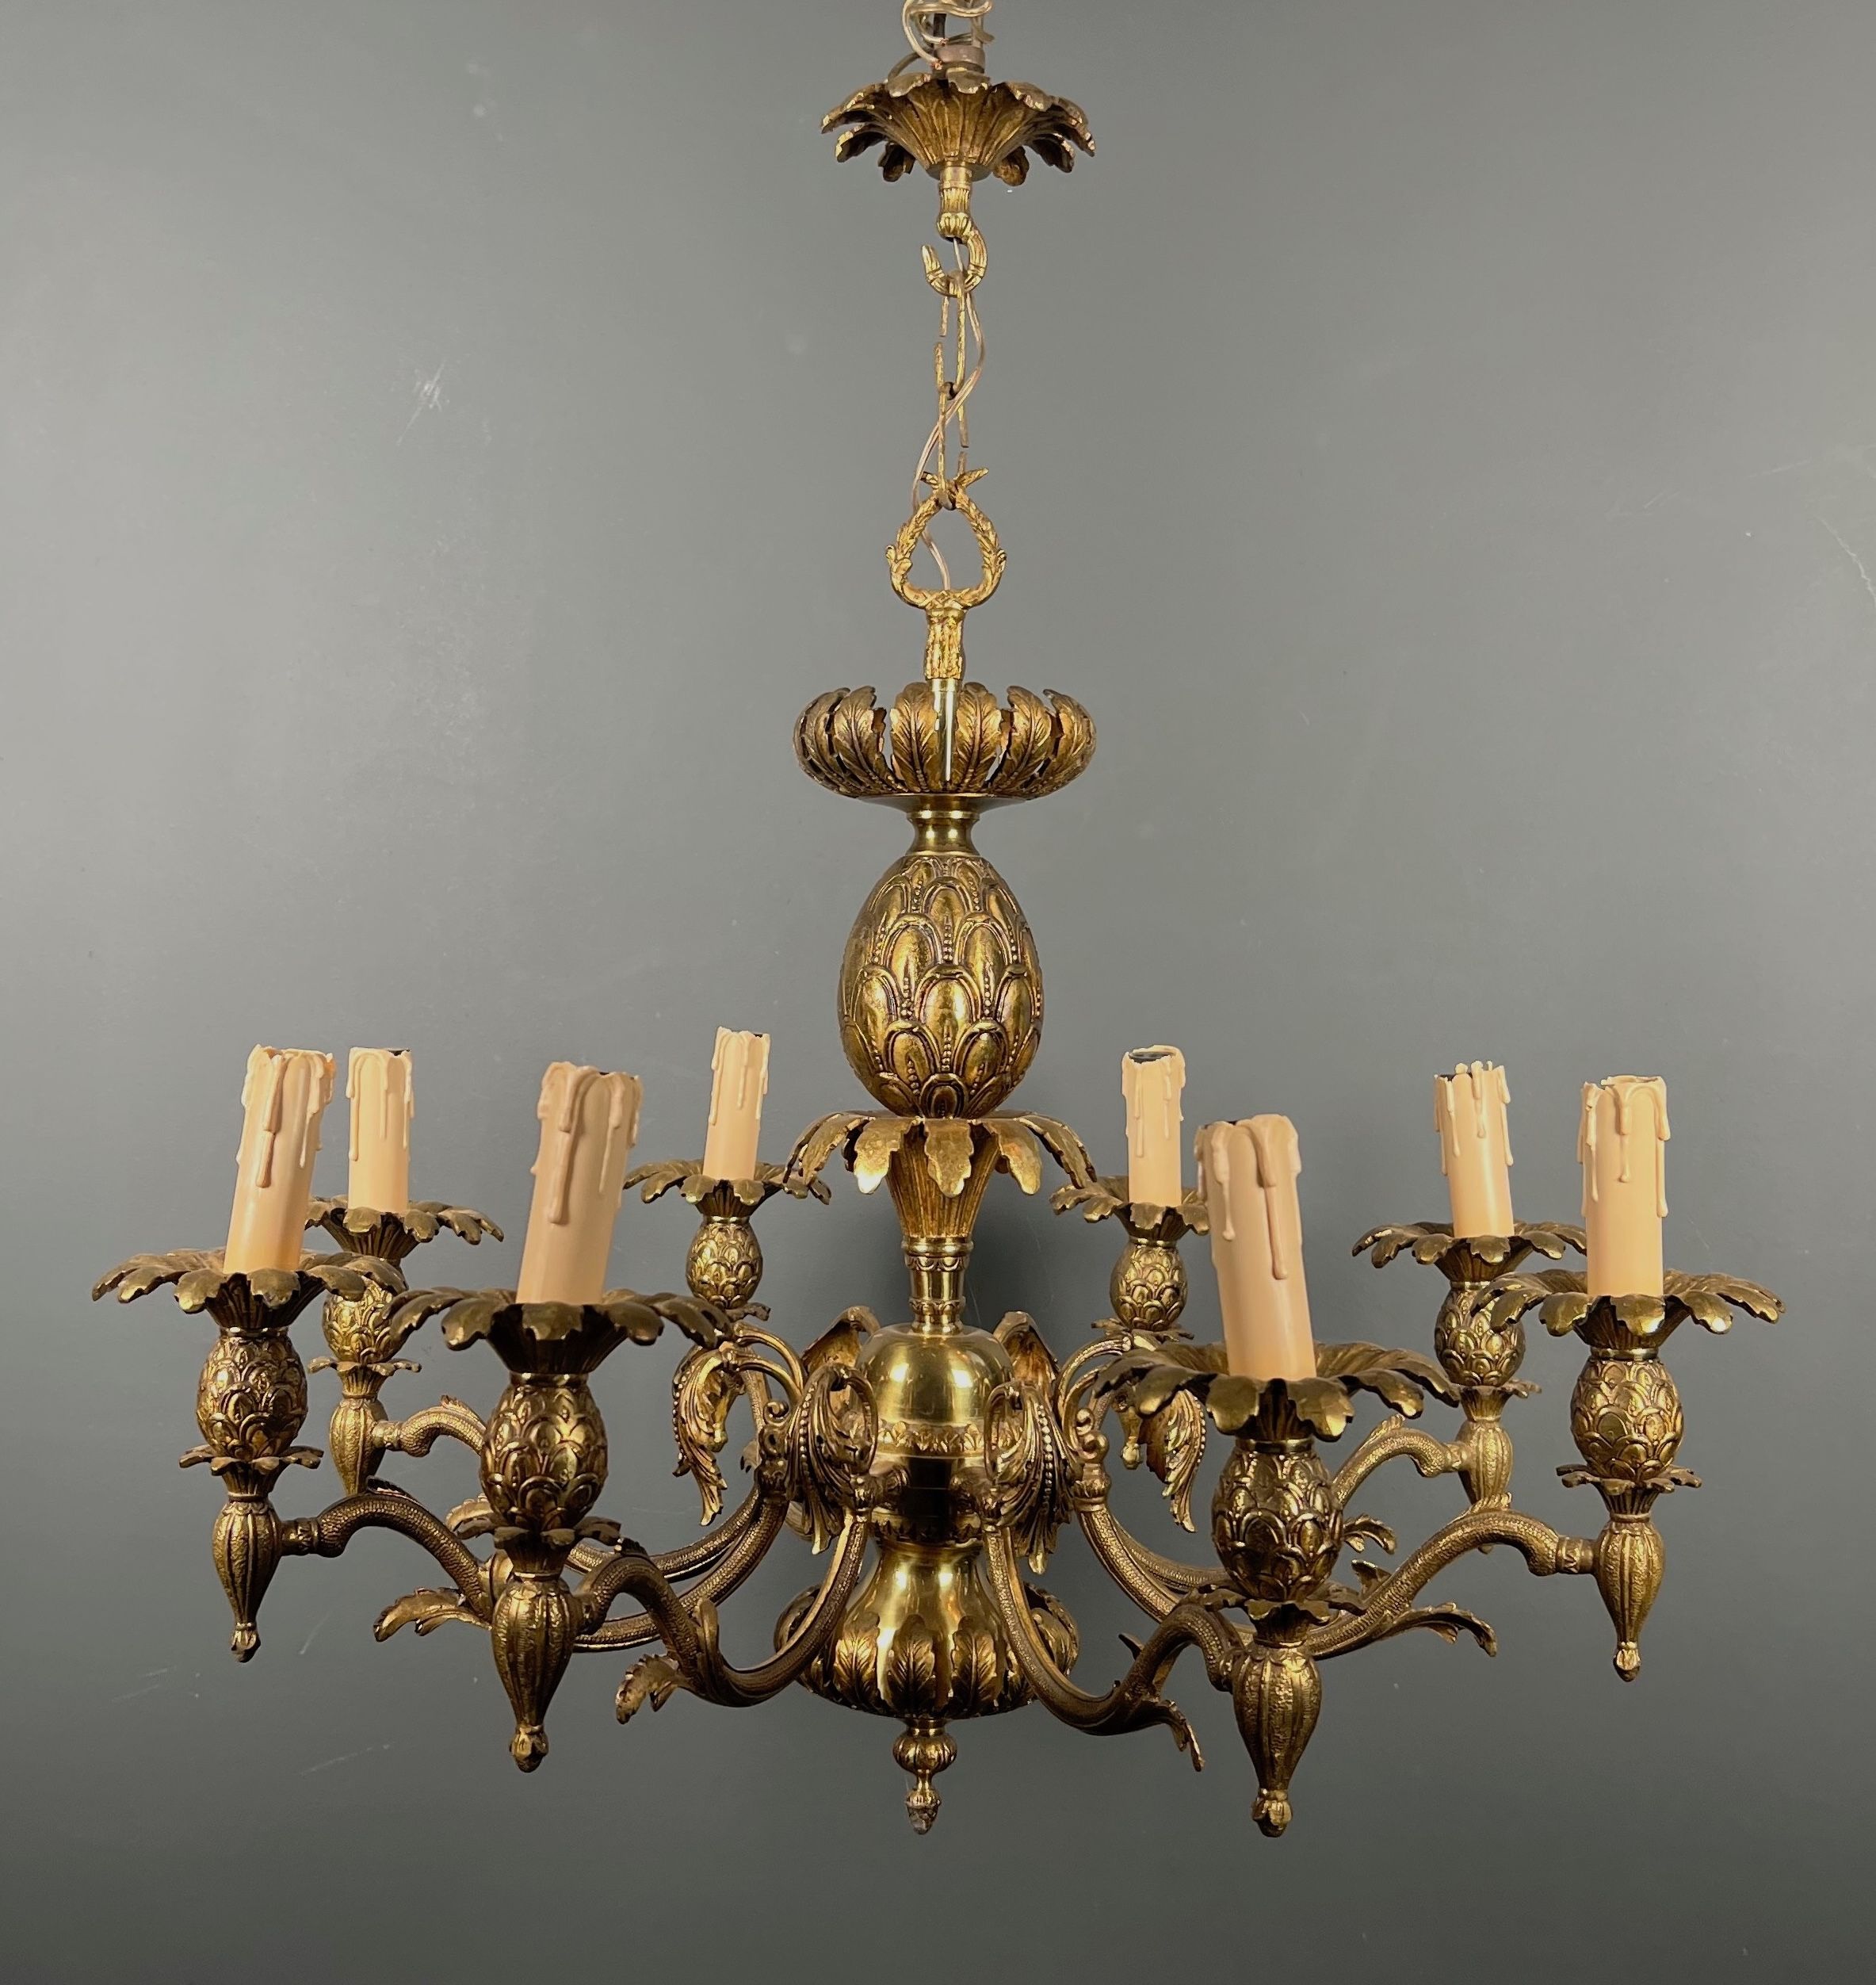 Pineapple Bronze Chandelier with 8 Arms in the Style of Maison Charles